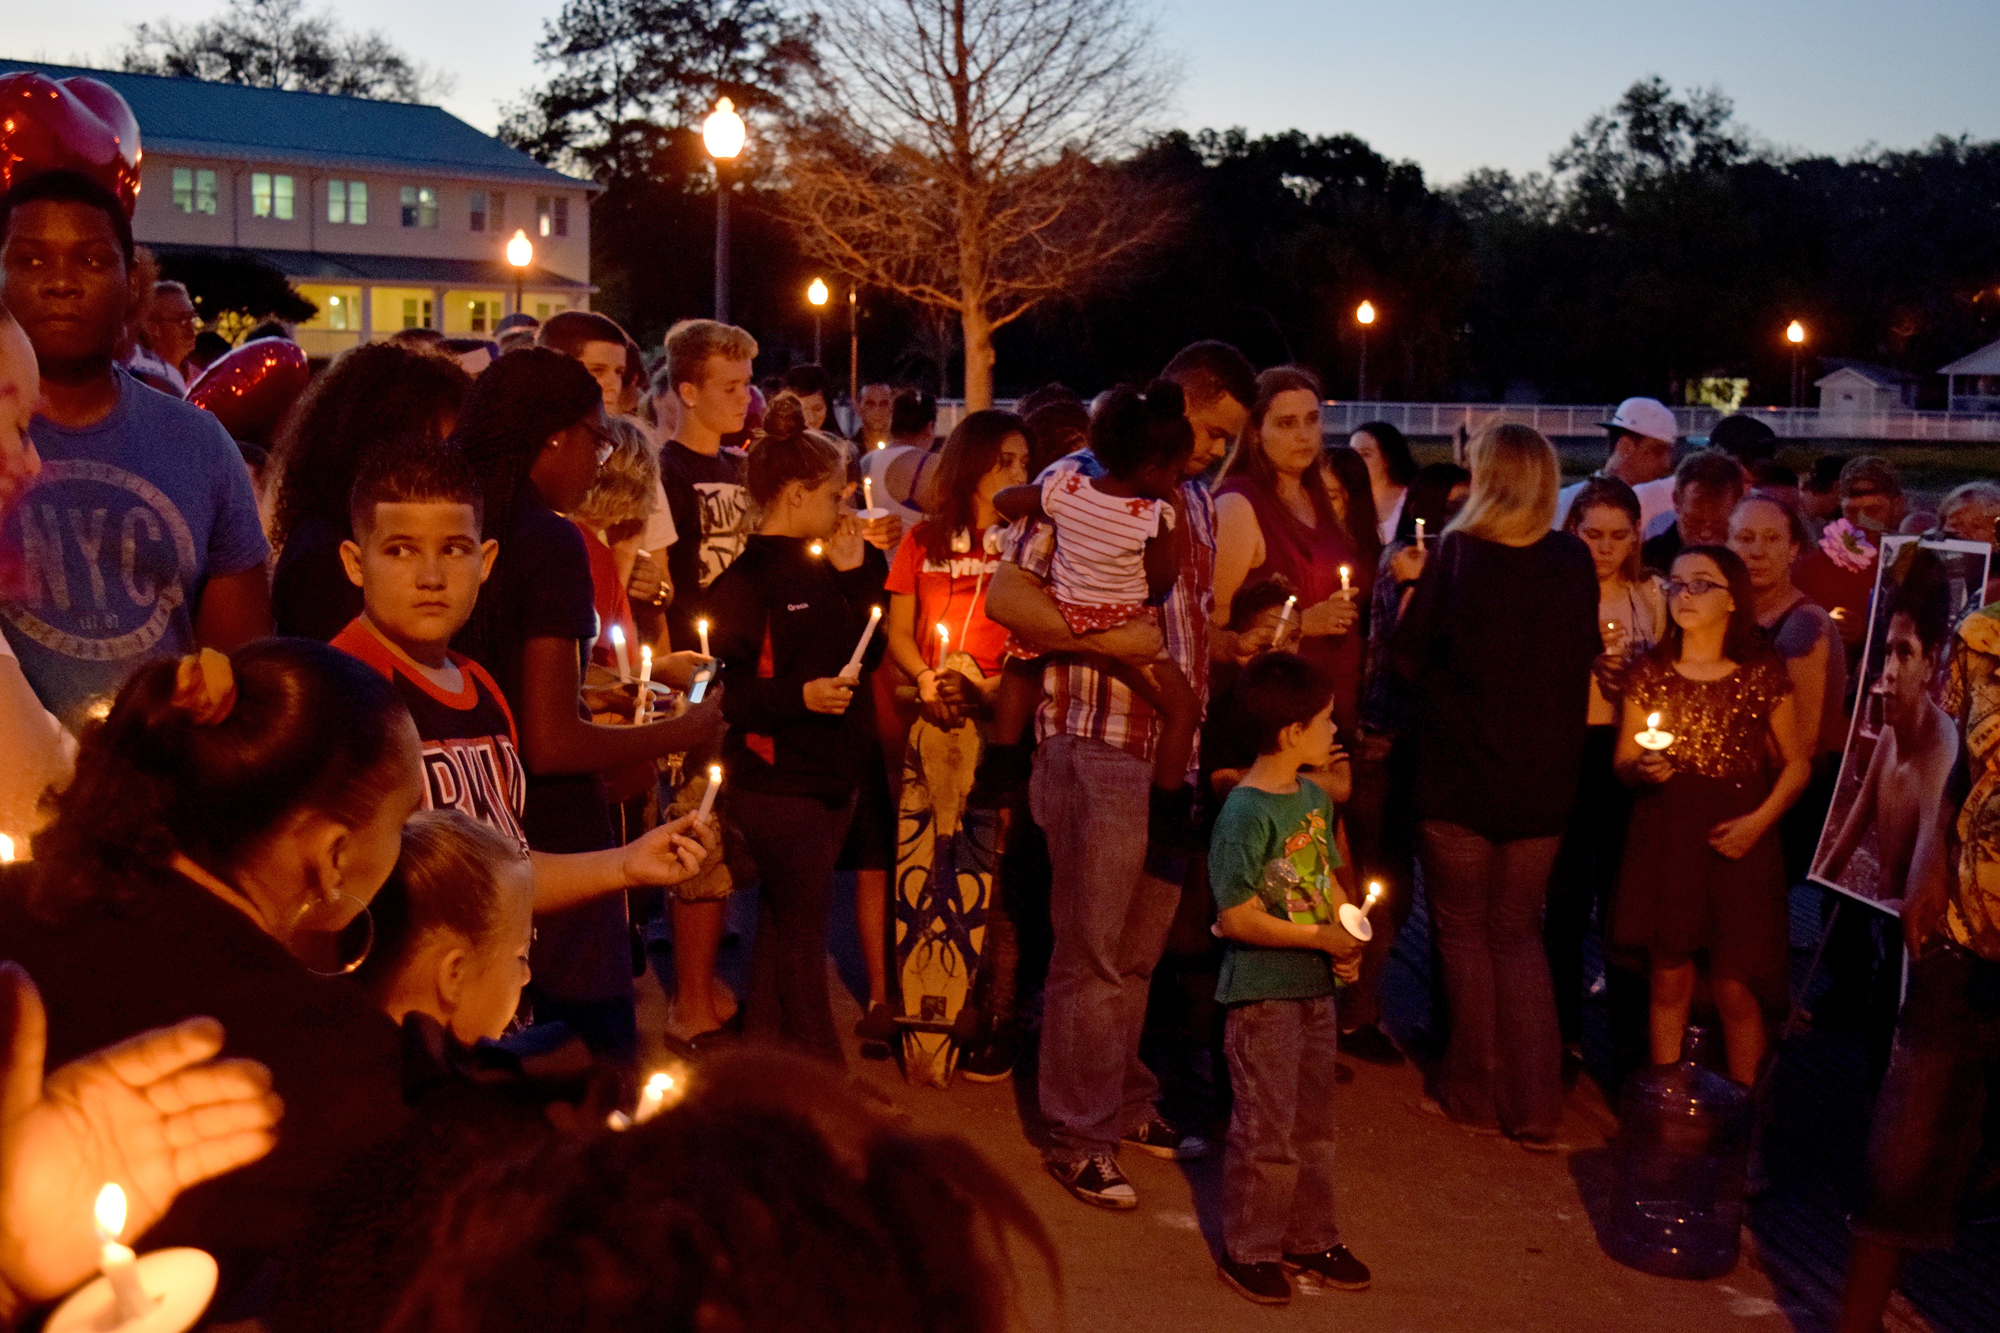 Attendees held their lit candles and sang “Amazing Grace” in memory of Antwan.